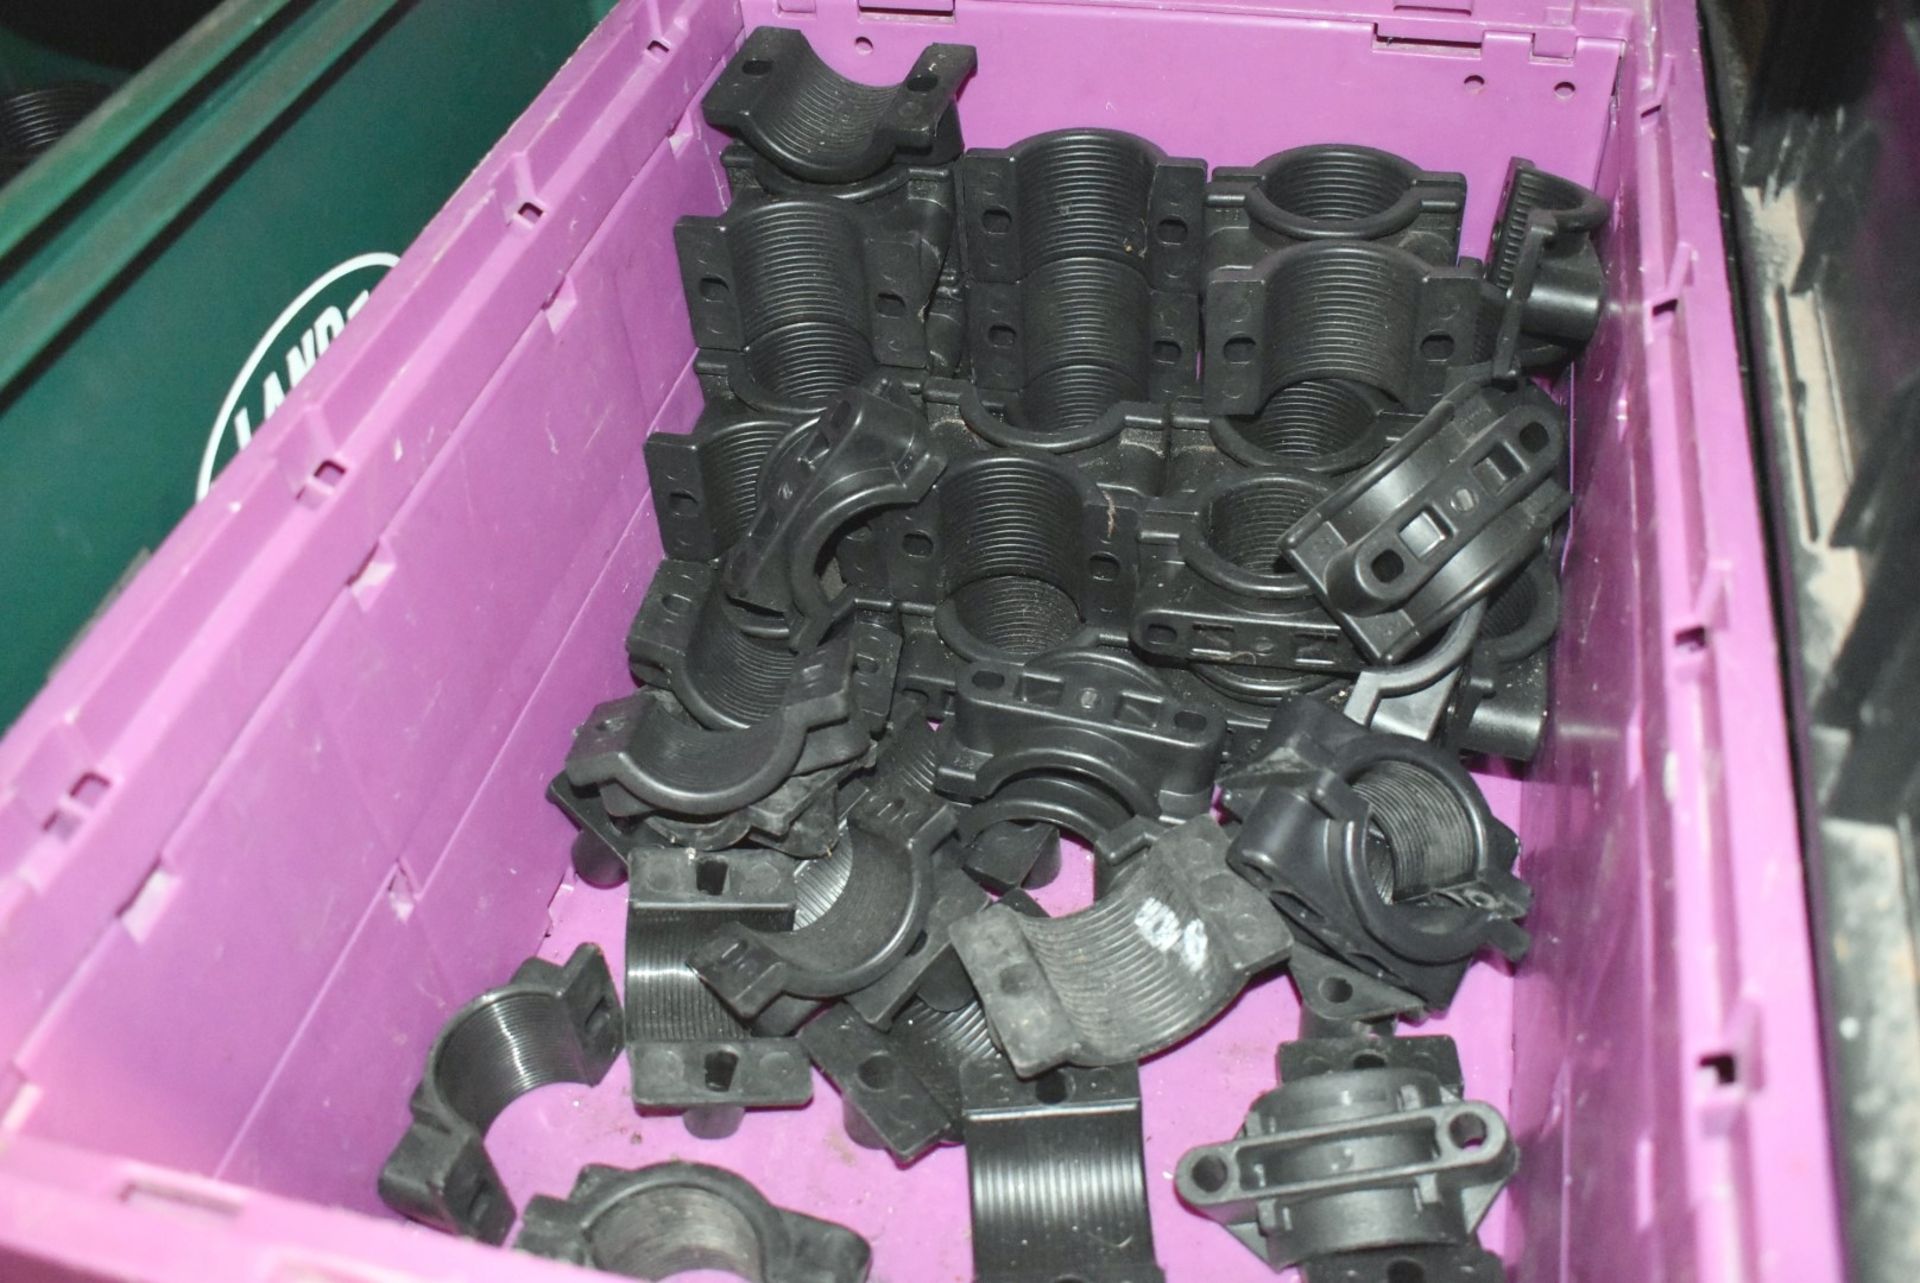 9 x Storage Containers Containing a Variety of Cable and Pipe Cleats - Unused Stock! - Image 11 of 11